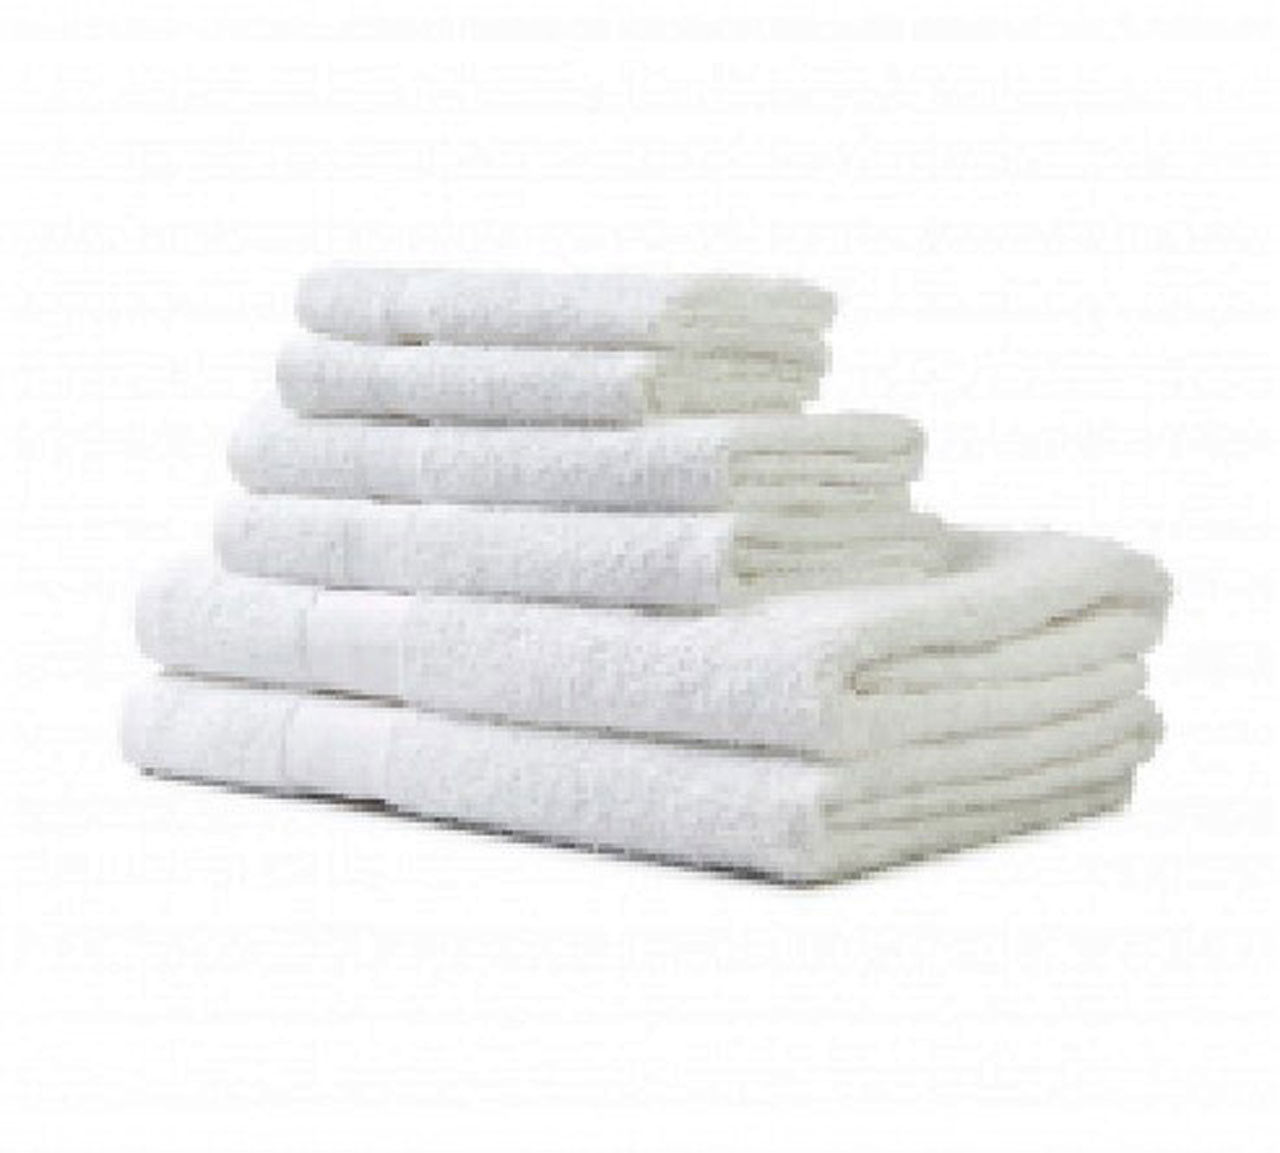 Is the quality of these towels from Jewel Wholesale durable and long-lasting?